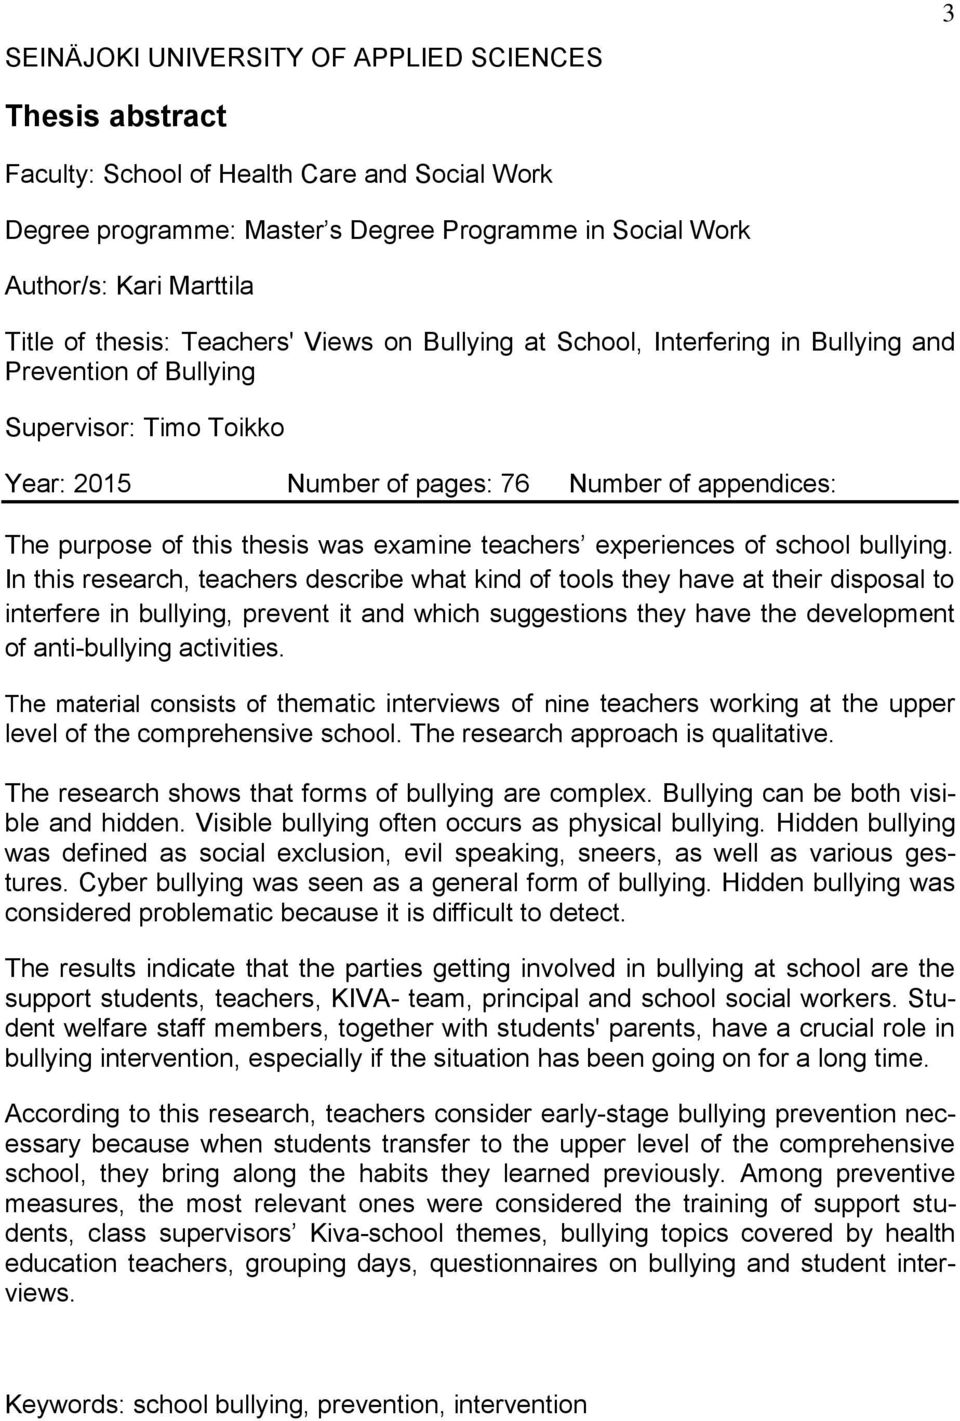 thesis was examine teachers experiences of school bullying.